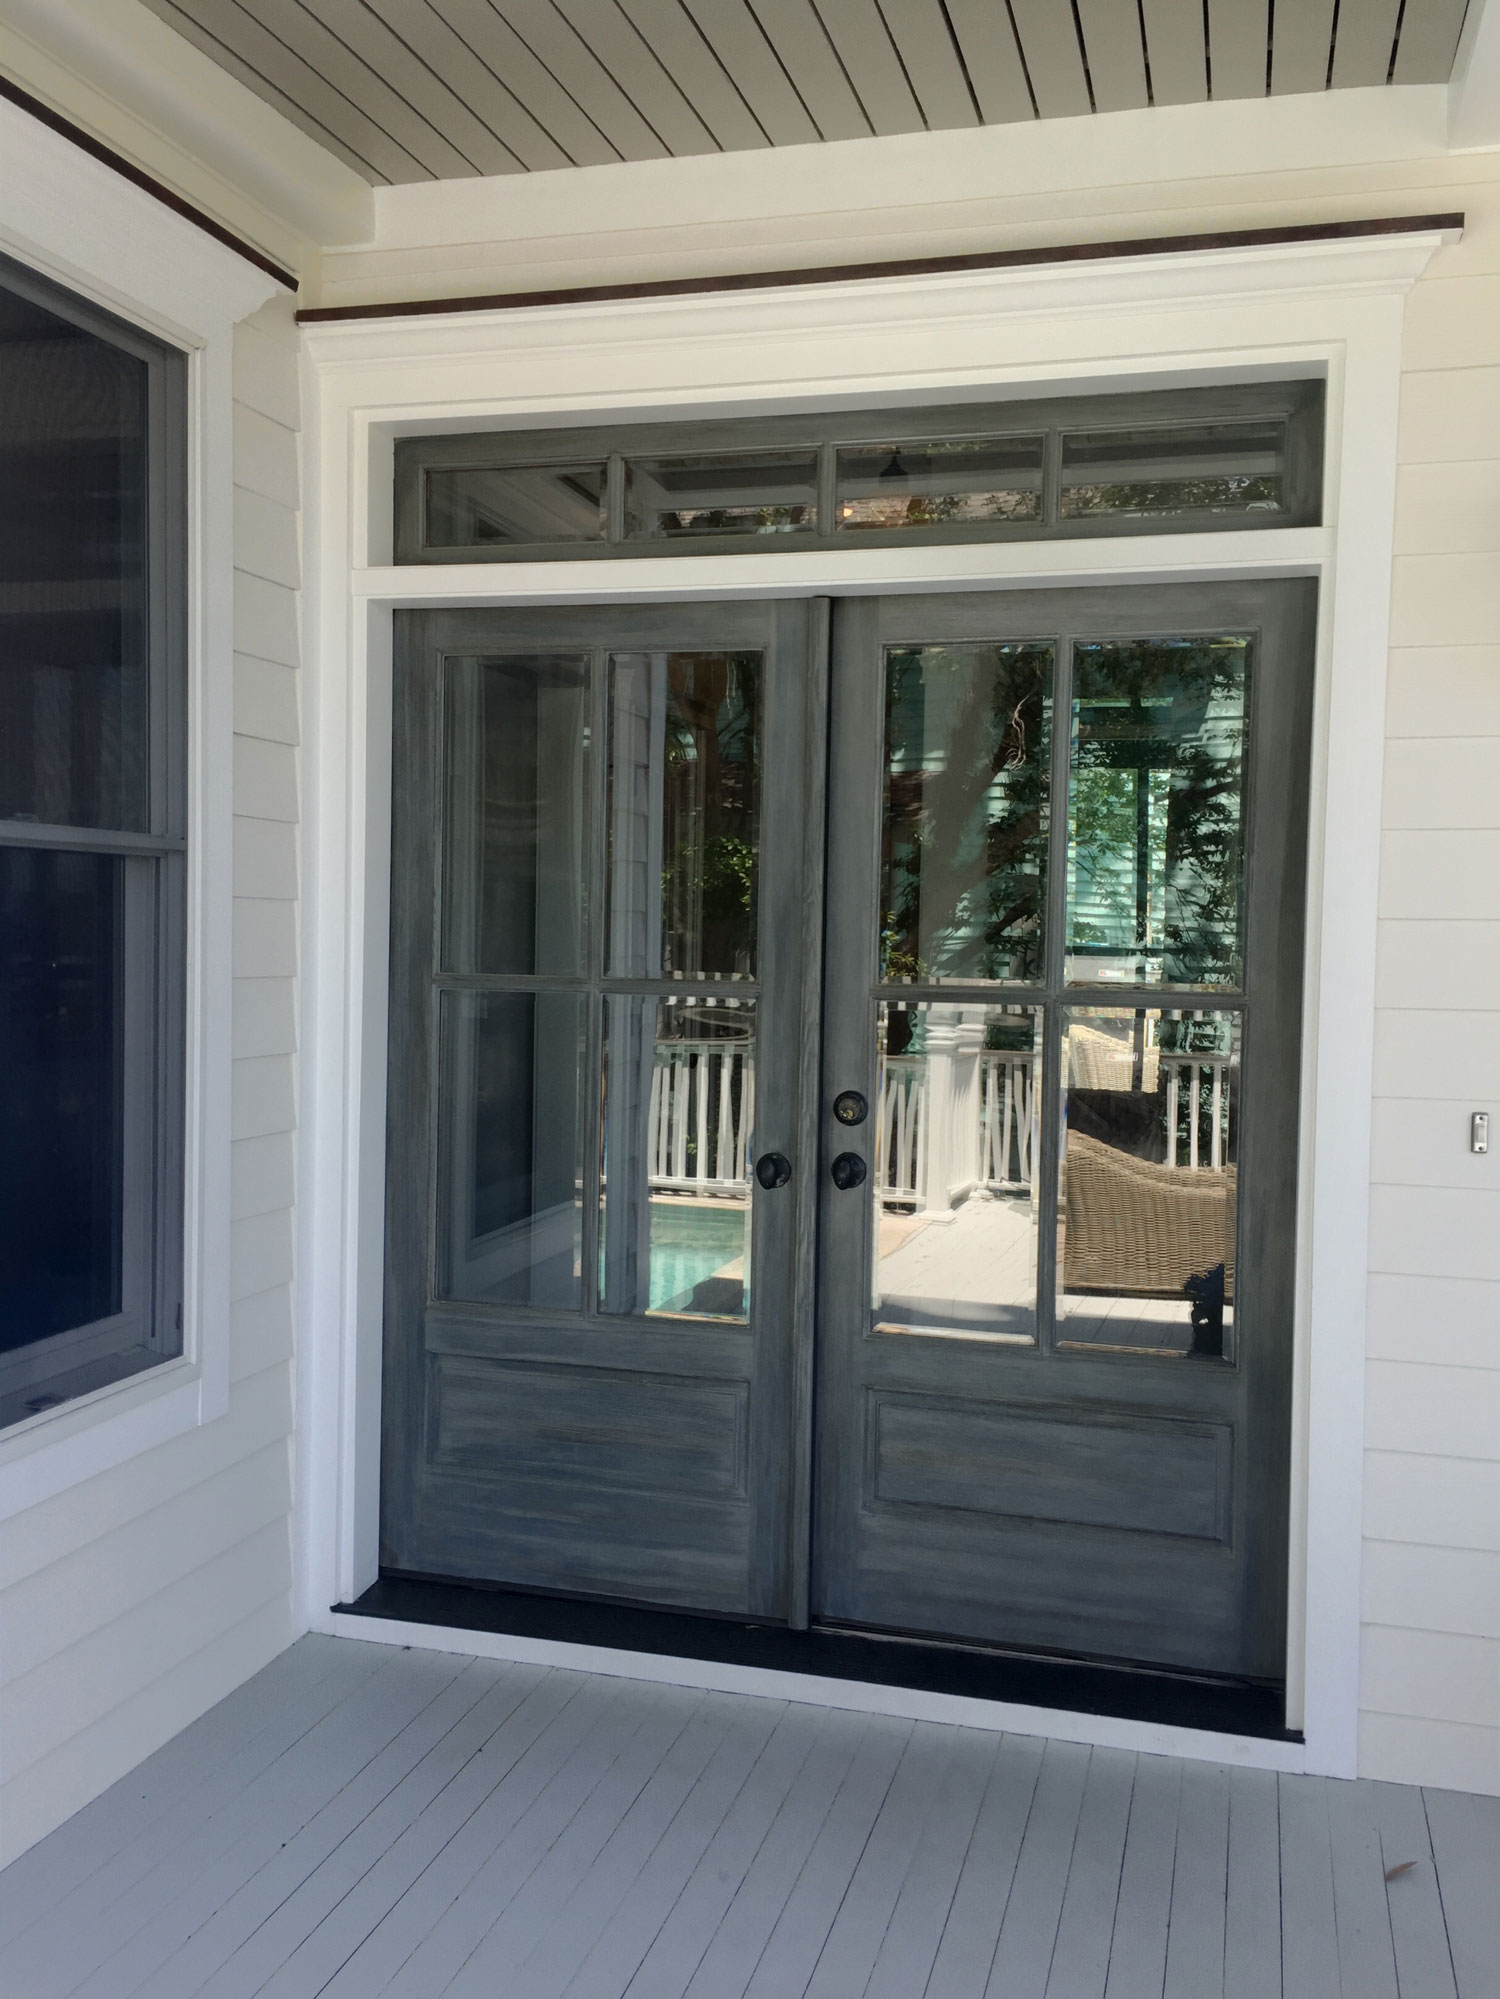 New front door package with weathered finish and transom windows